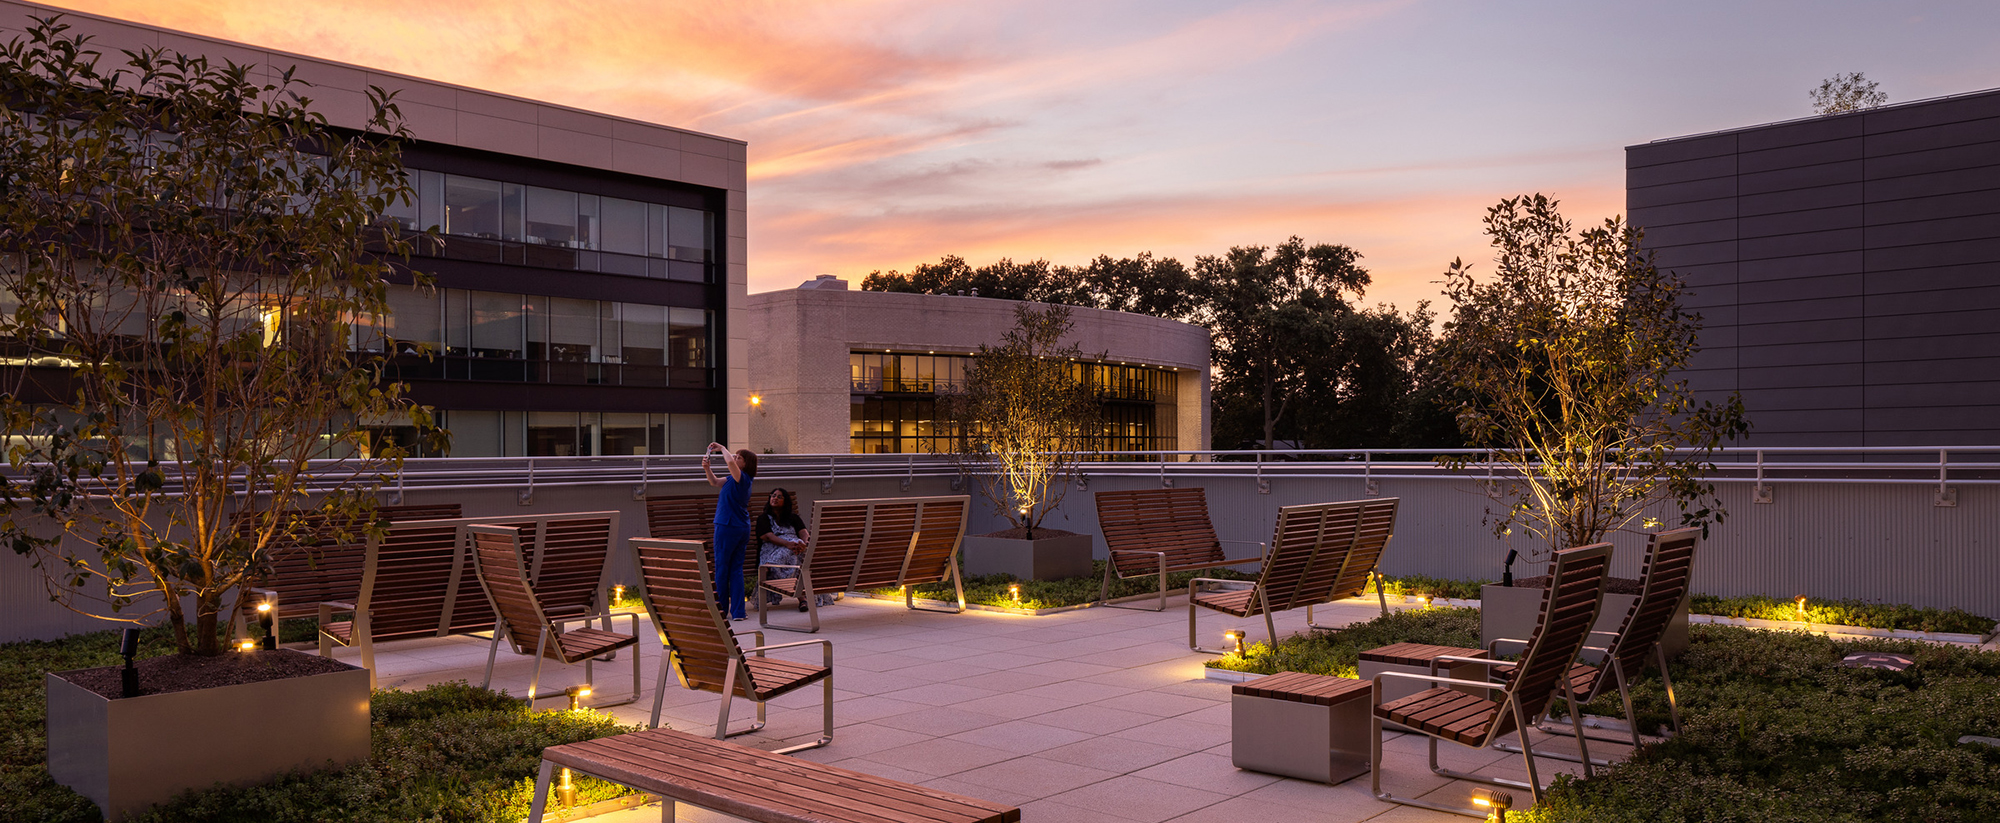 Rooftop terrace at dusk with integrated wooden seating and planters, under-floor lighting, against a backdrop of modern architecture and a vibrant sunset sky.